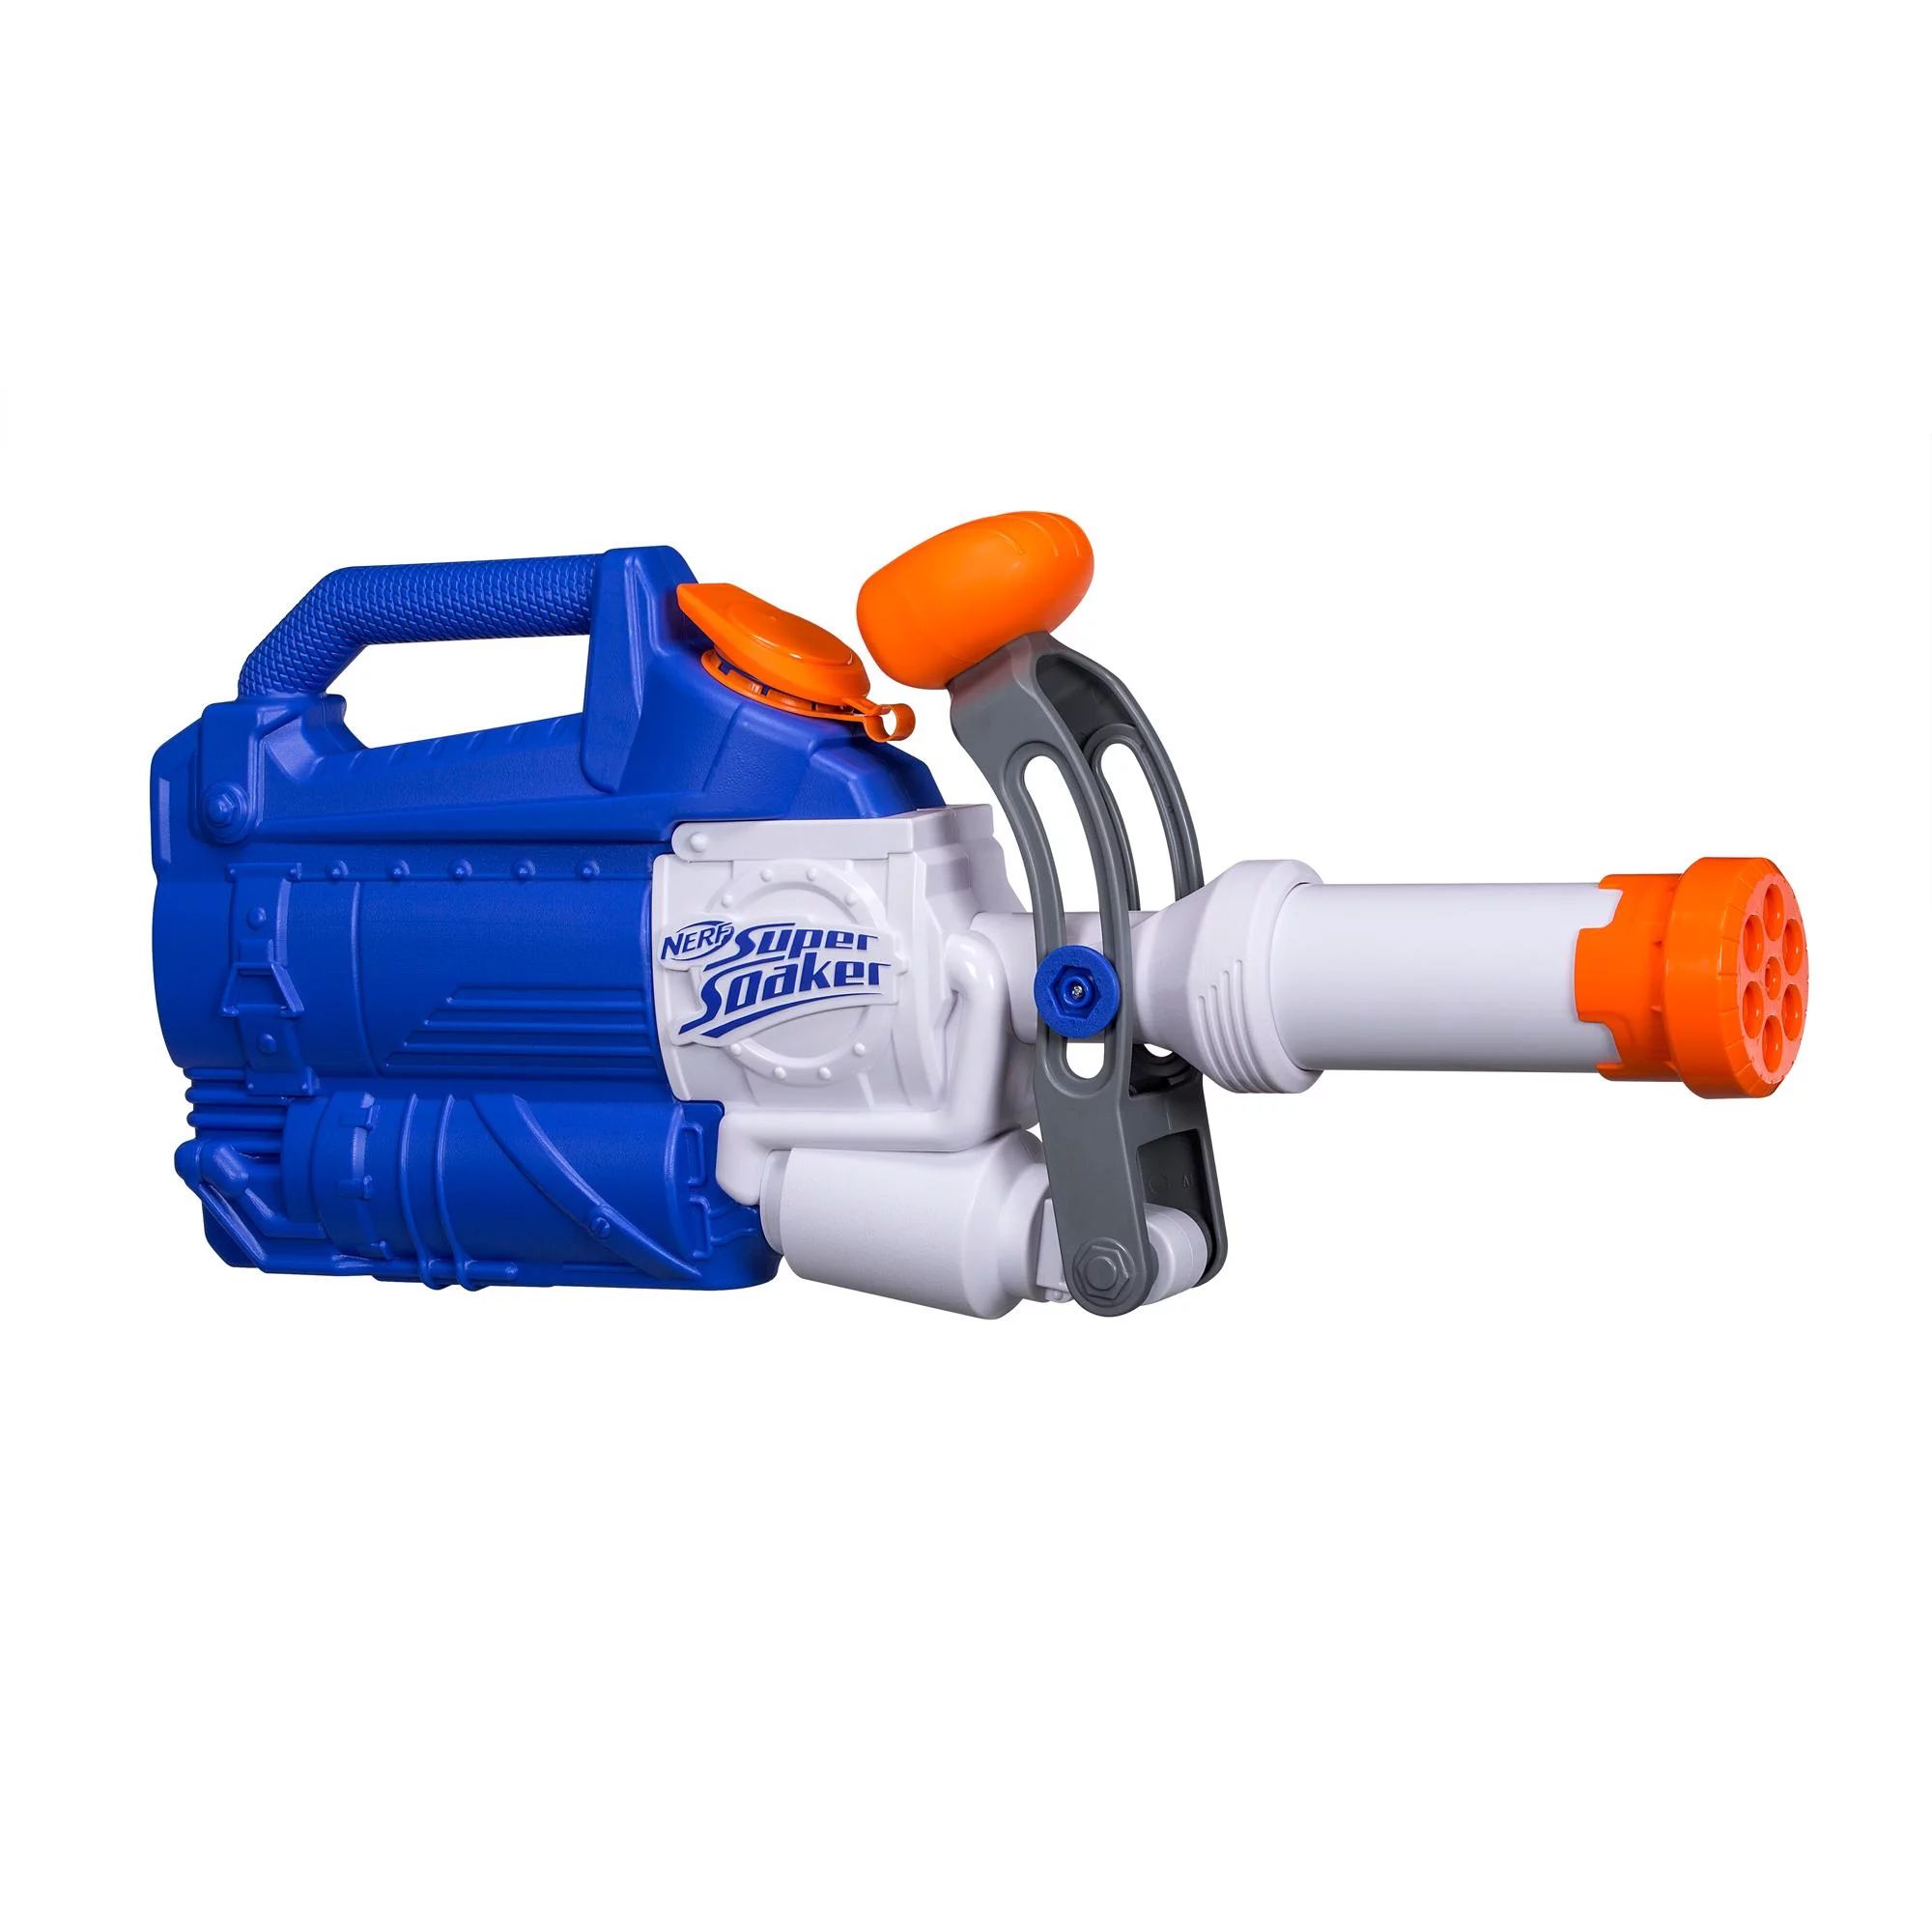 Nerf Super Soaker SoakZooka Water Blaster, for Kids Ages 7 and Up | Walmart (US)